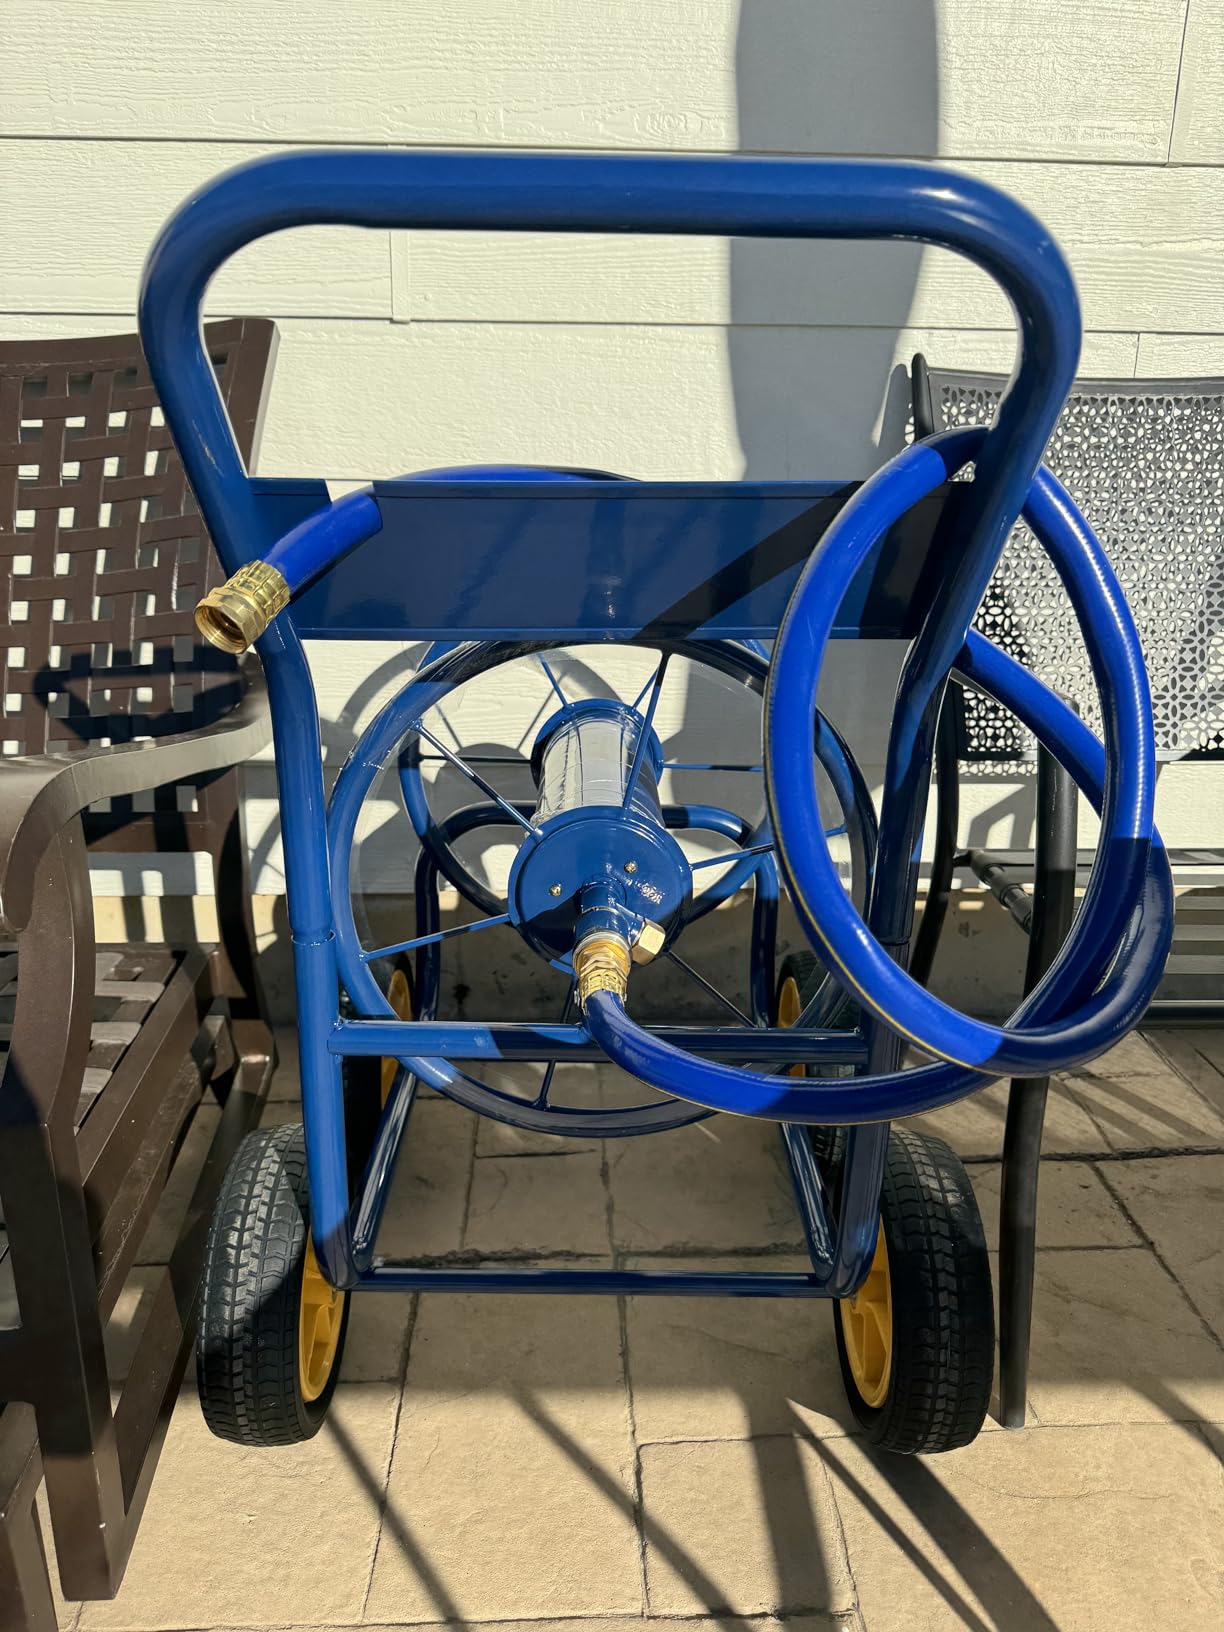 Garden Water Hose Reel Cart with 4 Wheels and Non-slip Grip